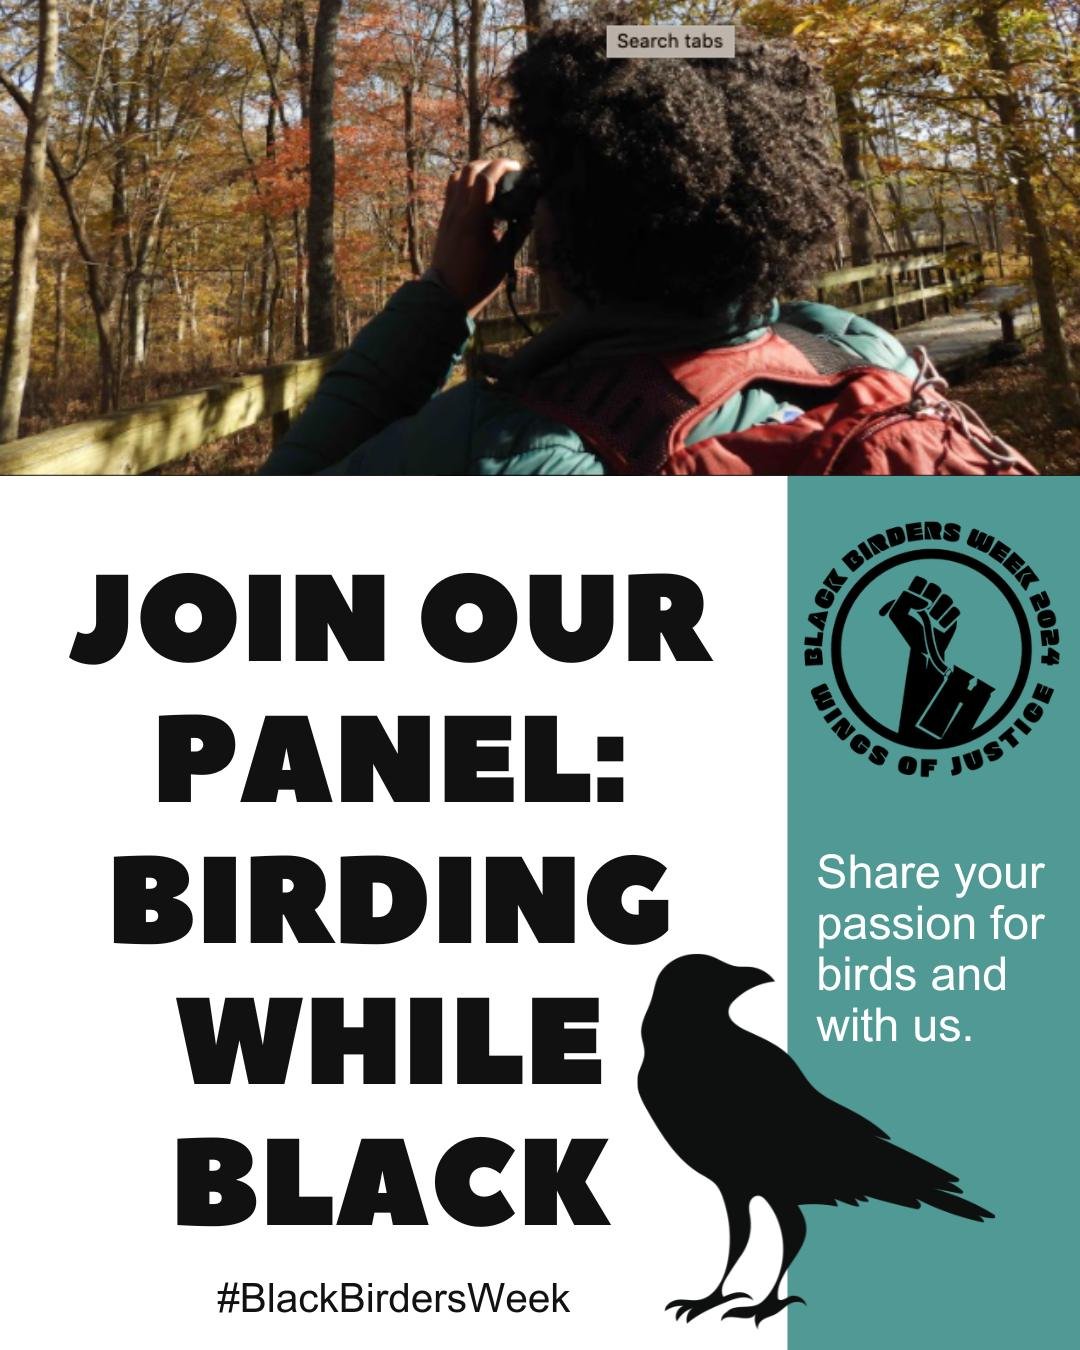 🔍Looking for #BlackBirdersWeek Panelists &amp; Moderators🔍

Are you a passionate Black birder with stories to share? We're excited to announce a virtual panel discussion during #BlackBirdersWeek, where we'll dive into the experiences and perspectiv